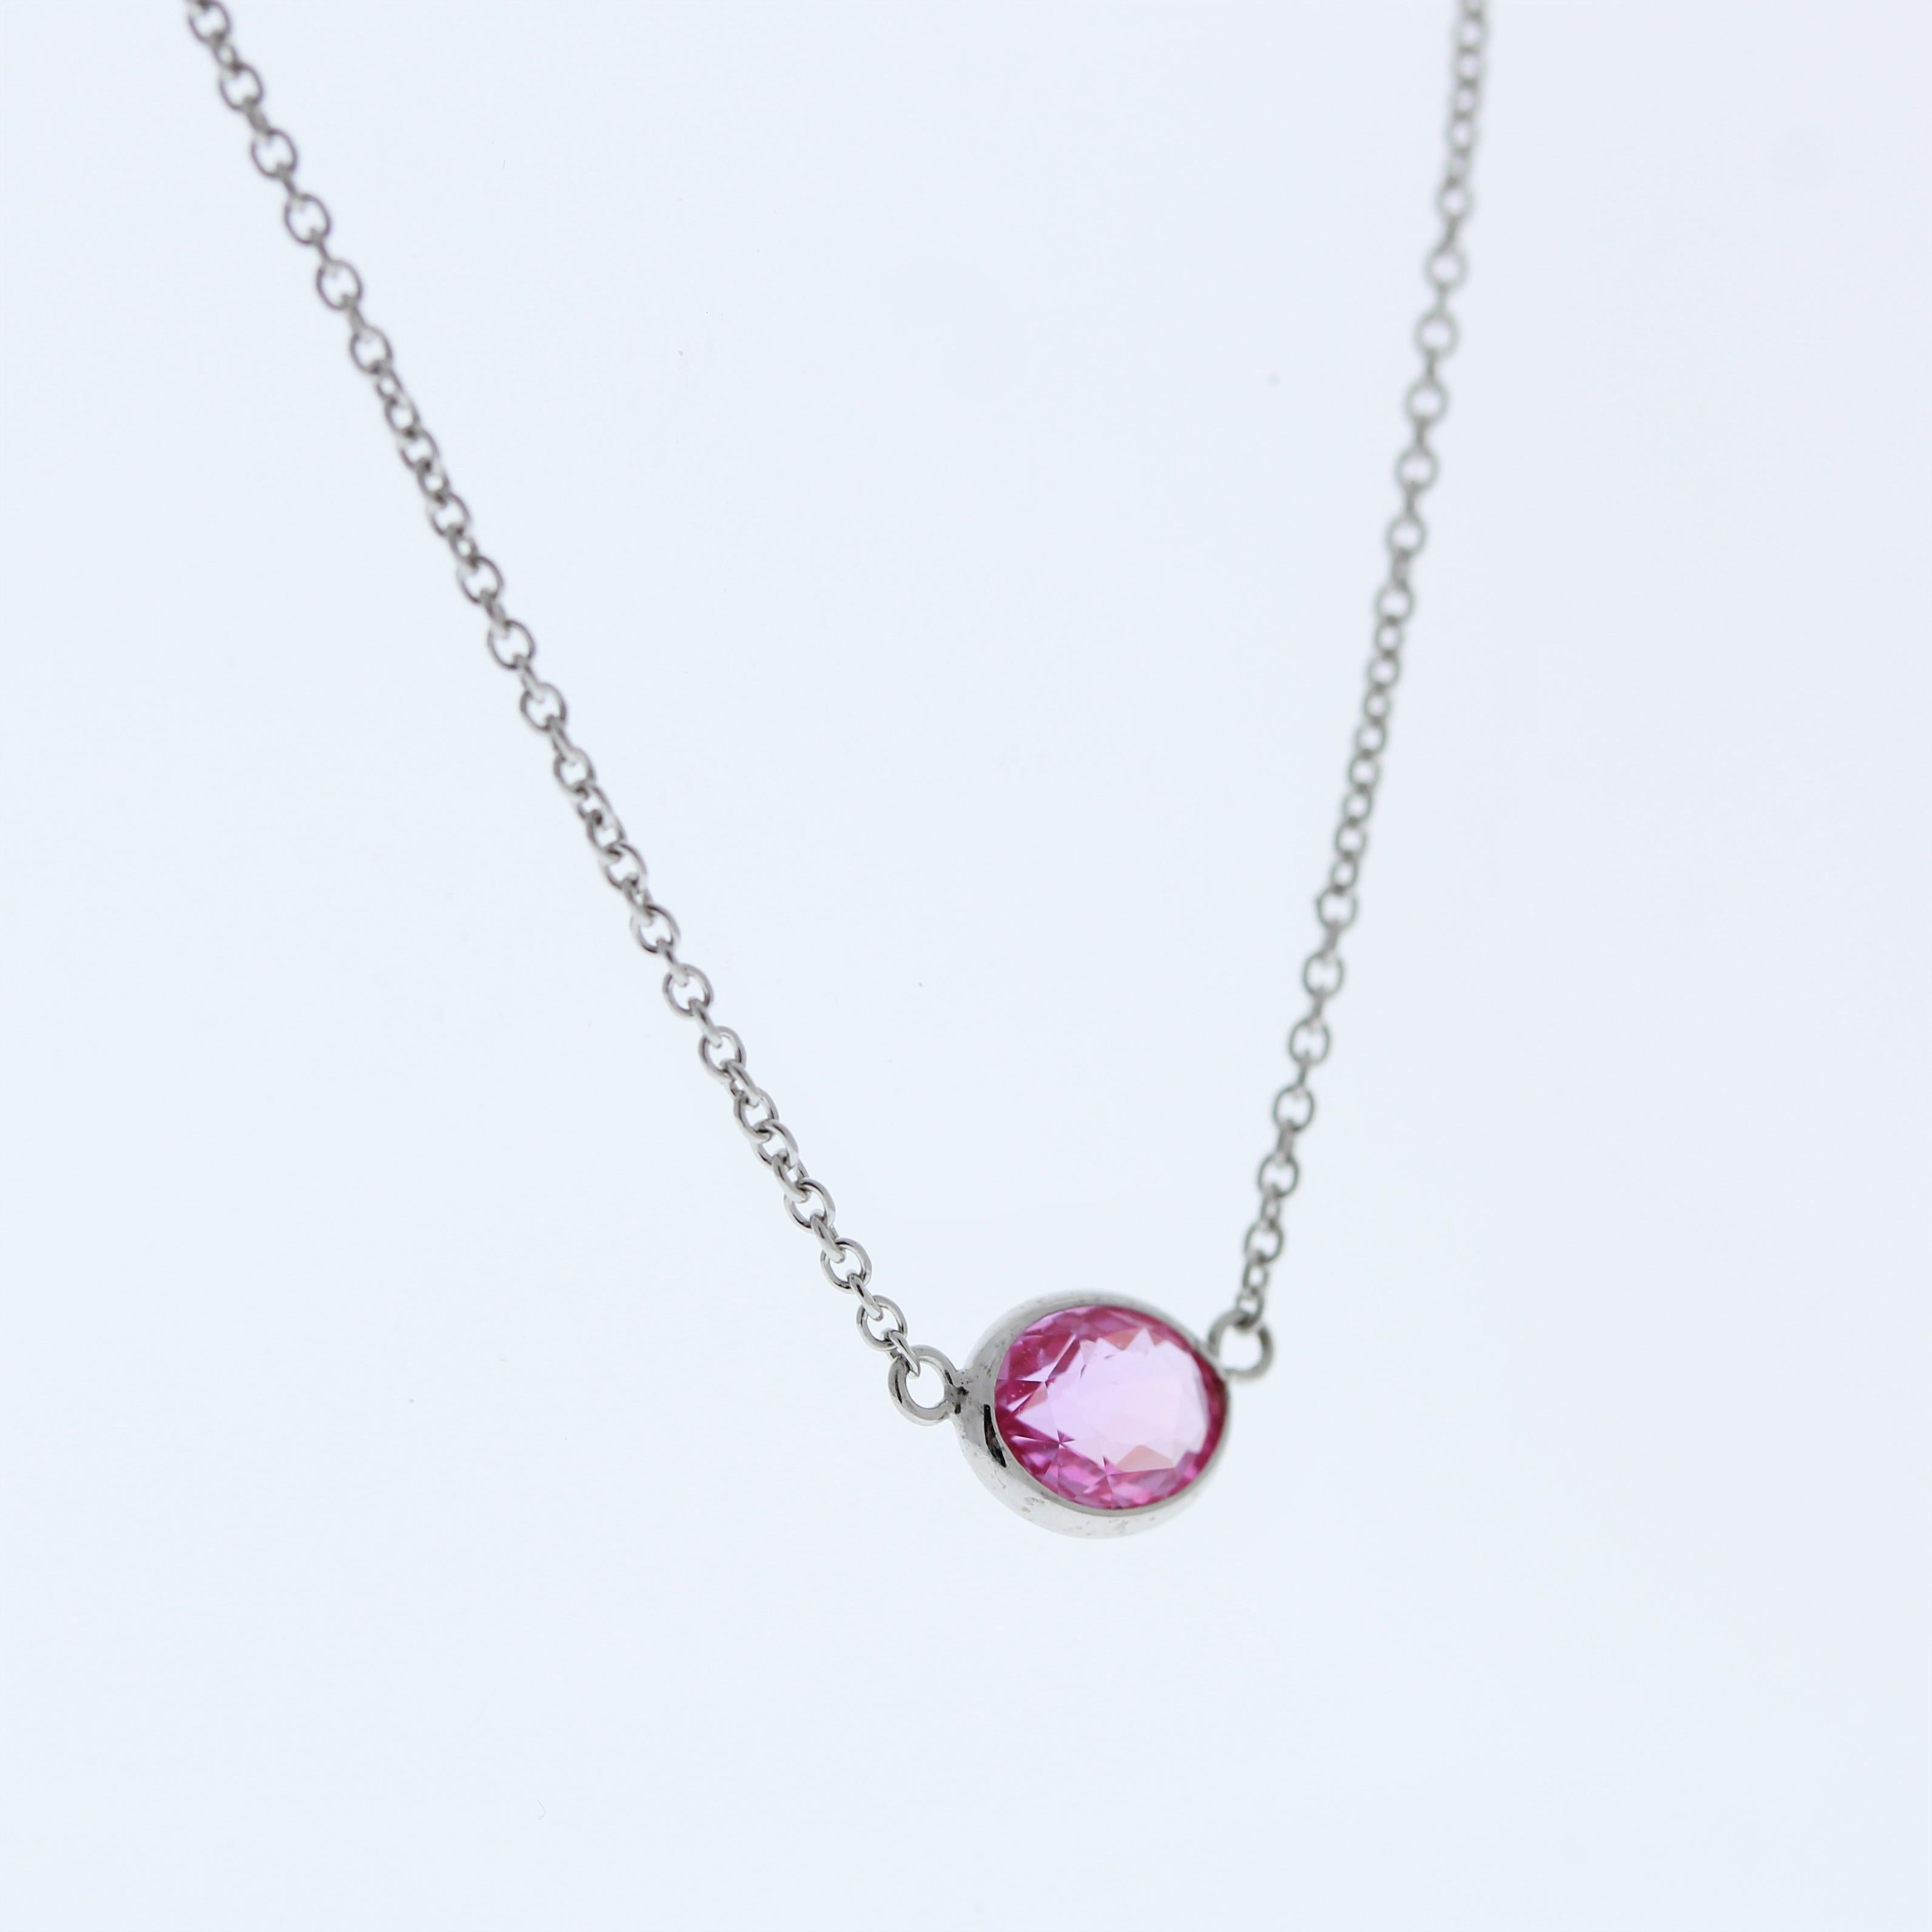 It sounds like you're describing a fashionable necklace featuring an oval-shaped Padparadscha gemstone weighing 1.27 carats, set in a 14 karat white gold pendant or setting. The gemstone's pinkish-orange hues would likely make for a striking and